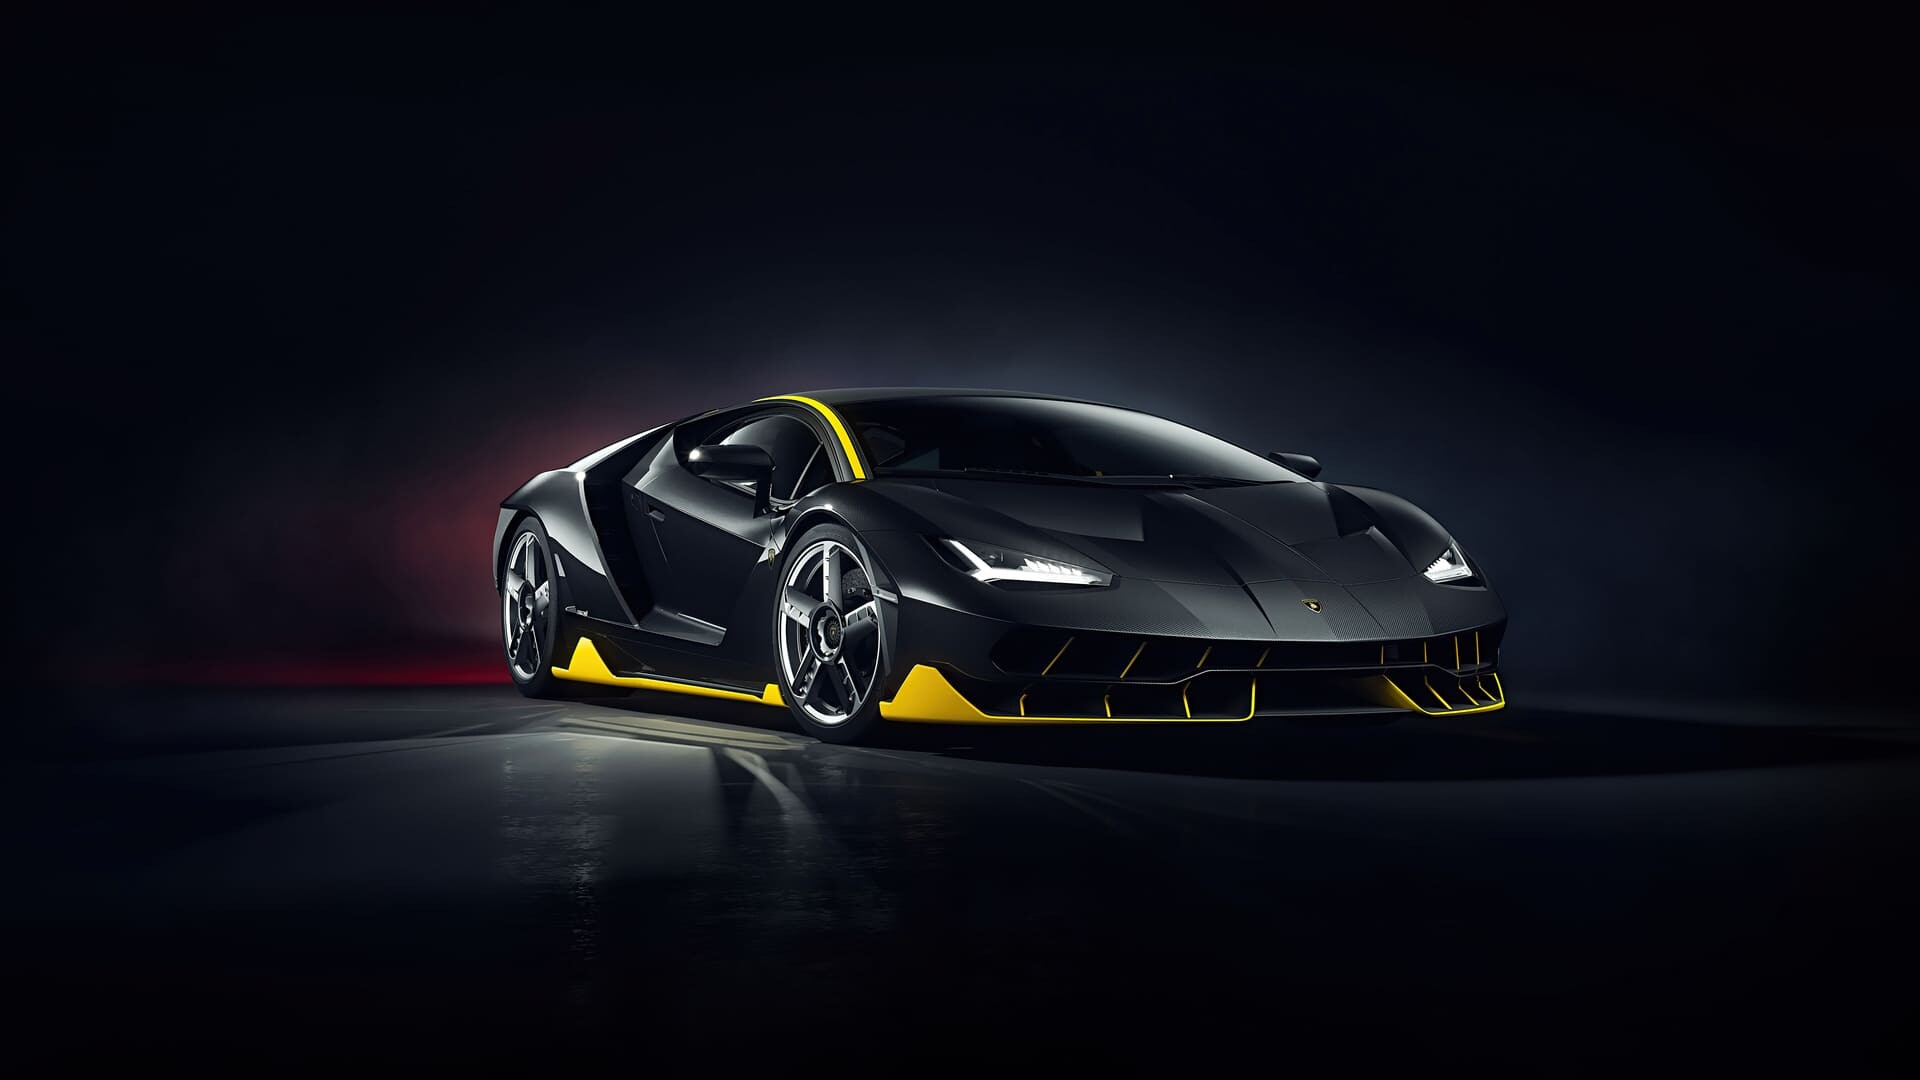 Lamborghini: The company was founded in 1963 to produce grand touring cars, Centenario. 1920x1080 Full HD Background.